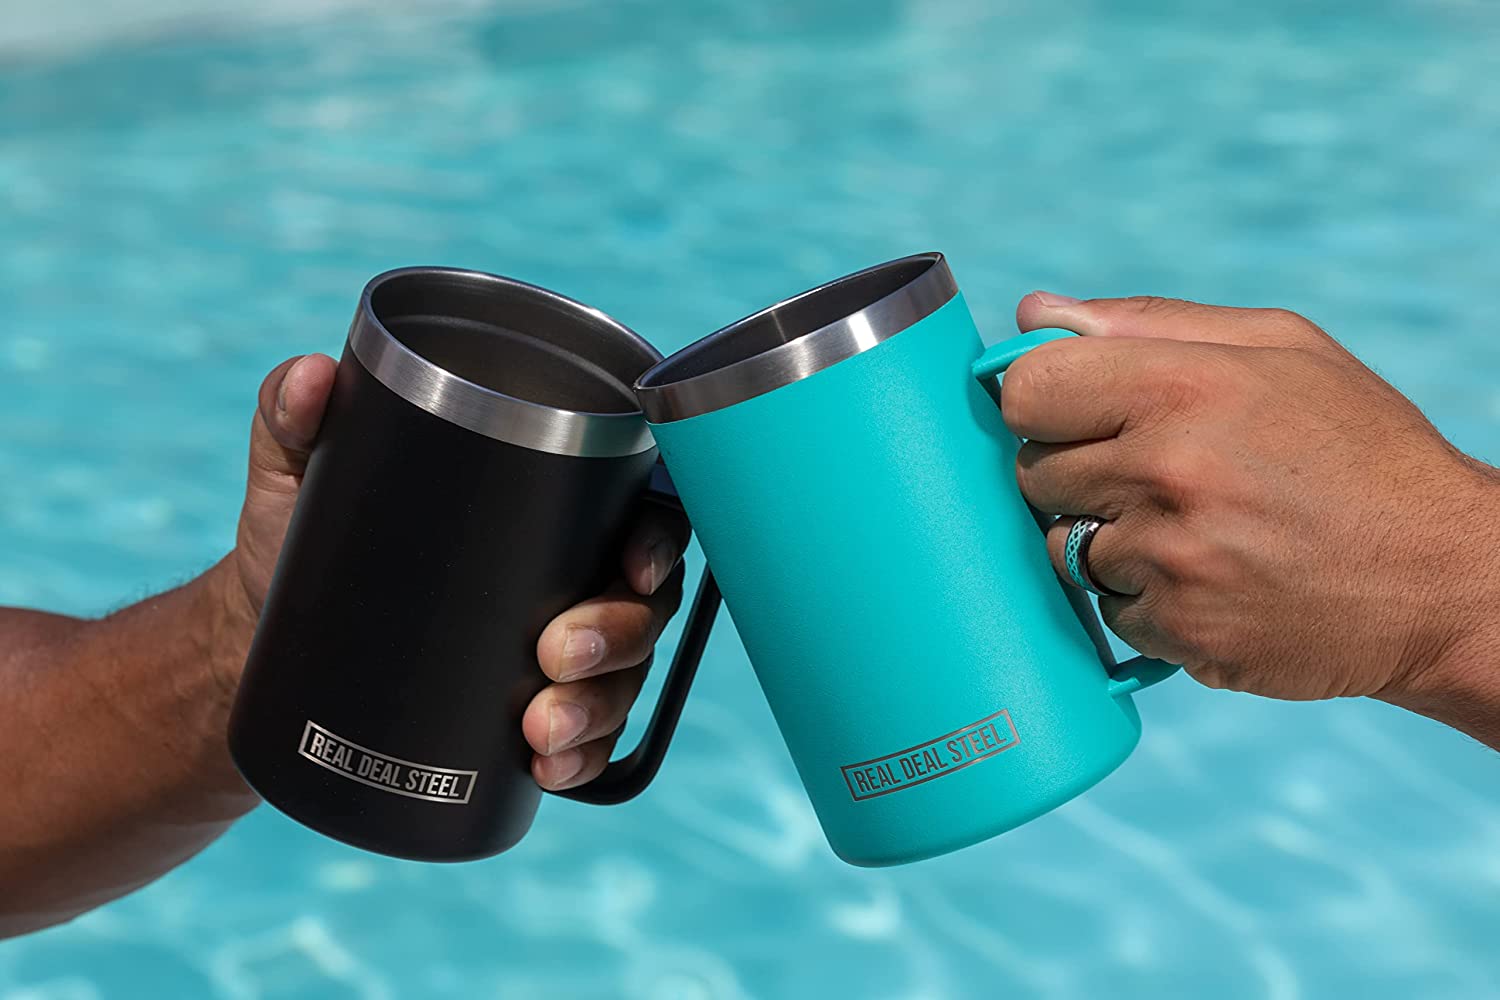 Thermos 20 oz. Vacuum Insulated Stainless Steel Travel Mug